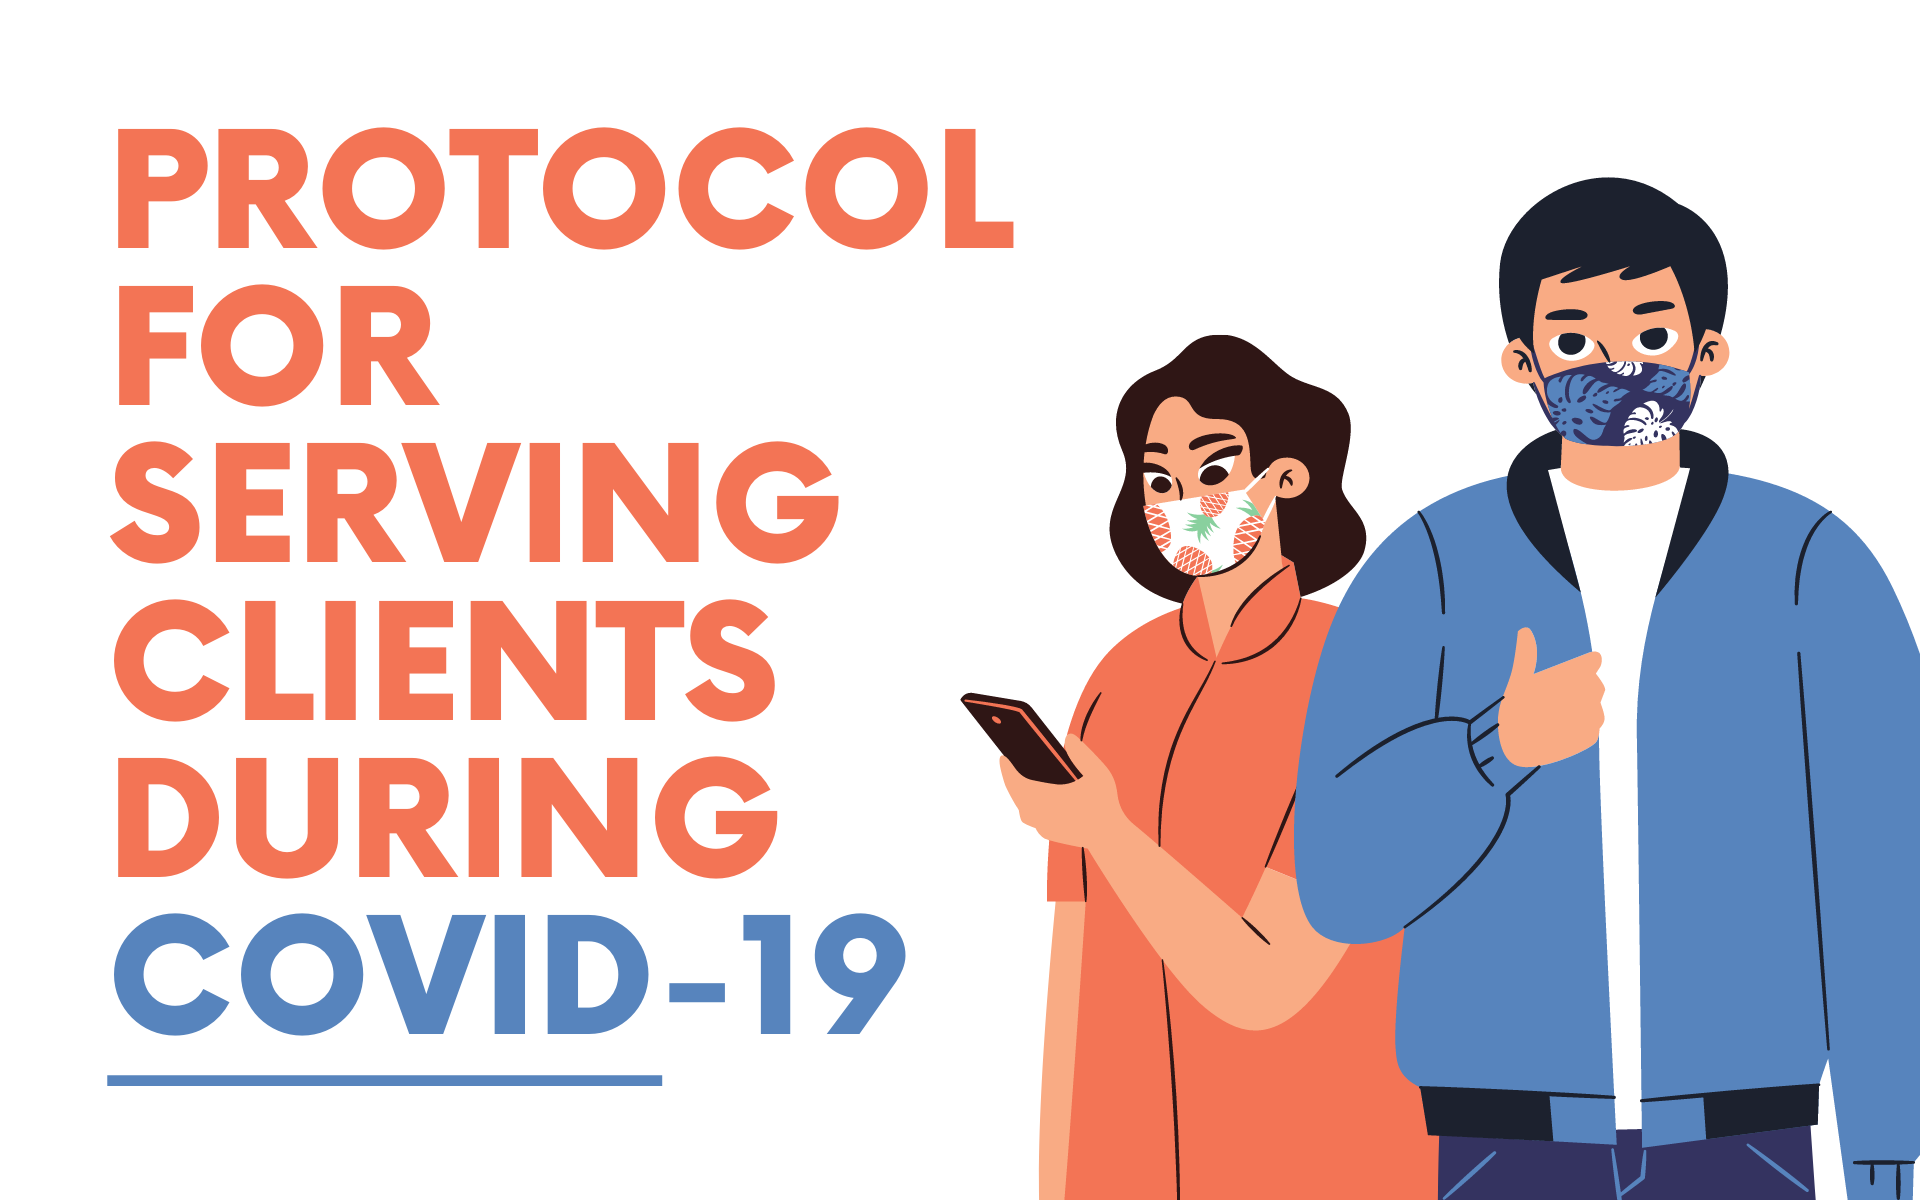 COVID-19 Protocol for Serving Clients